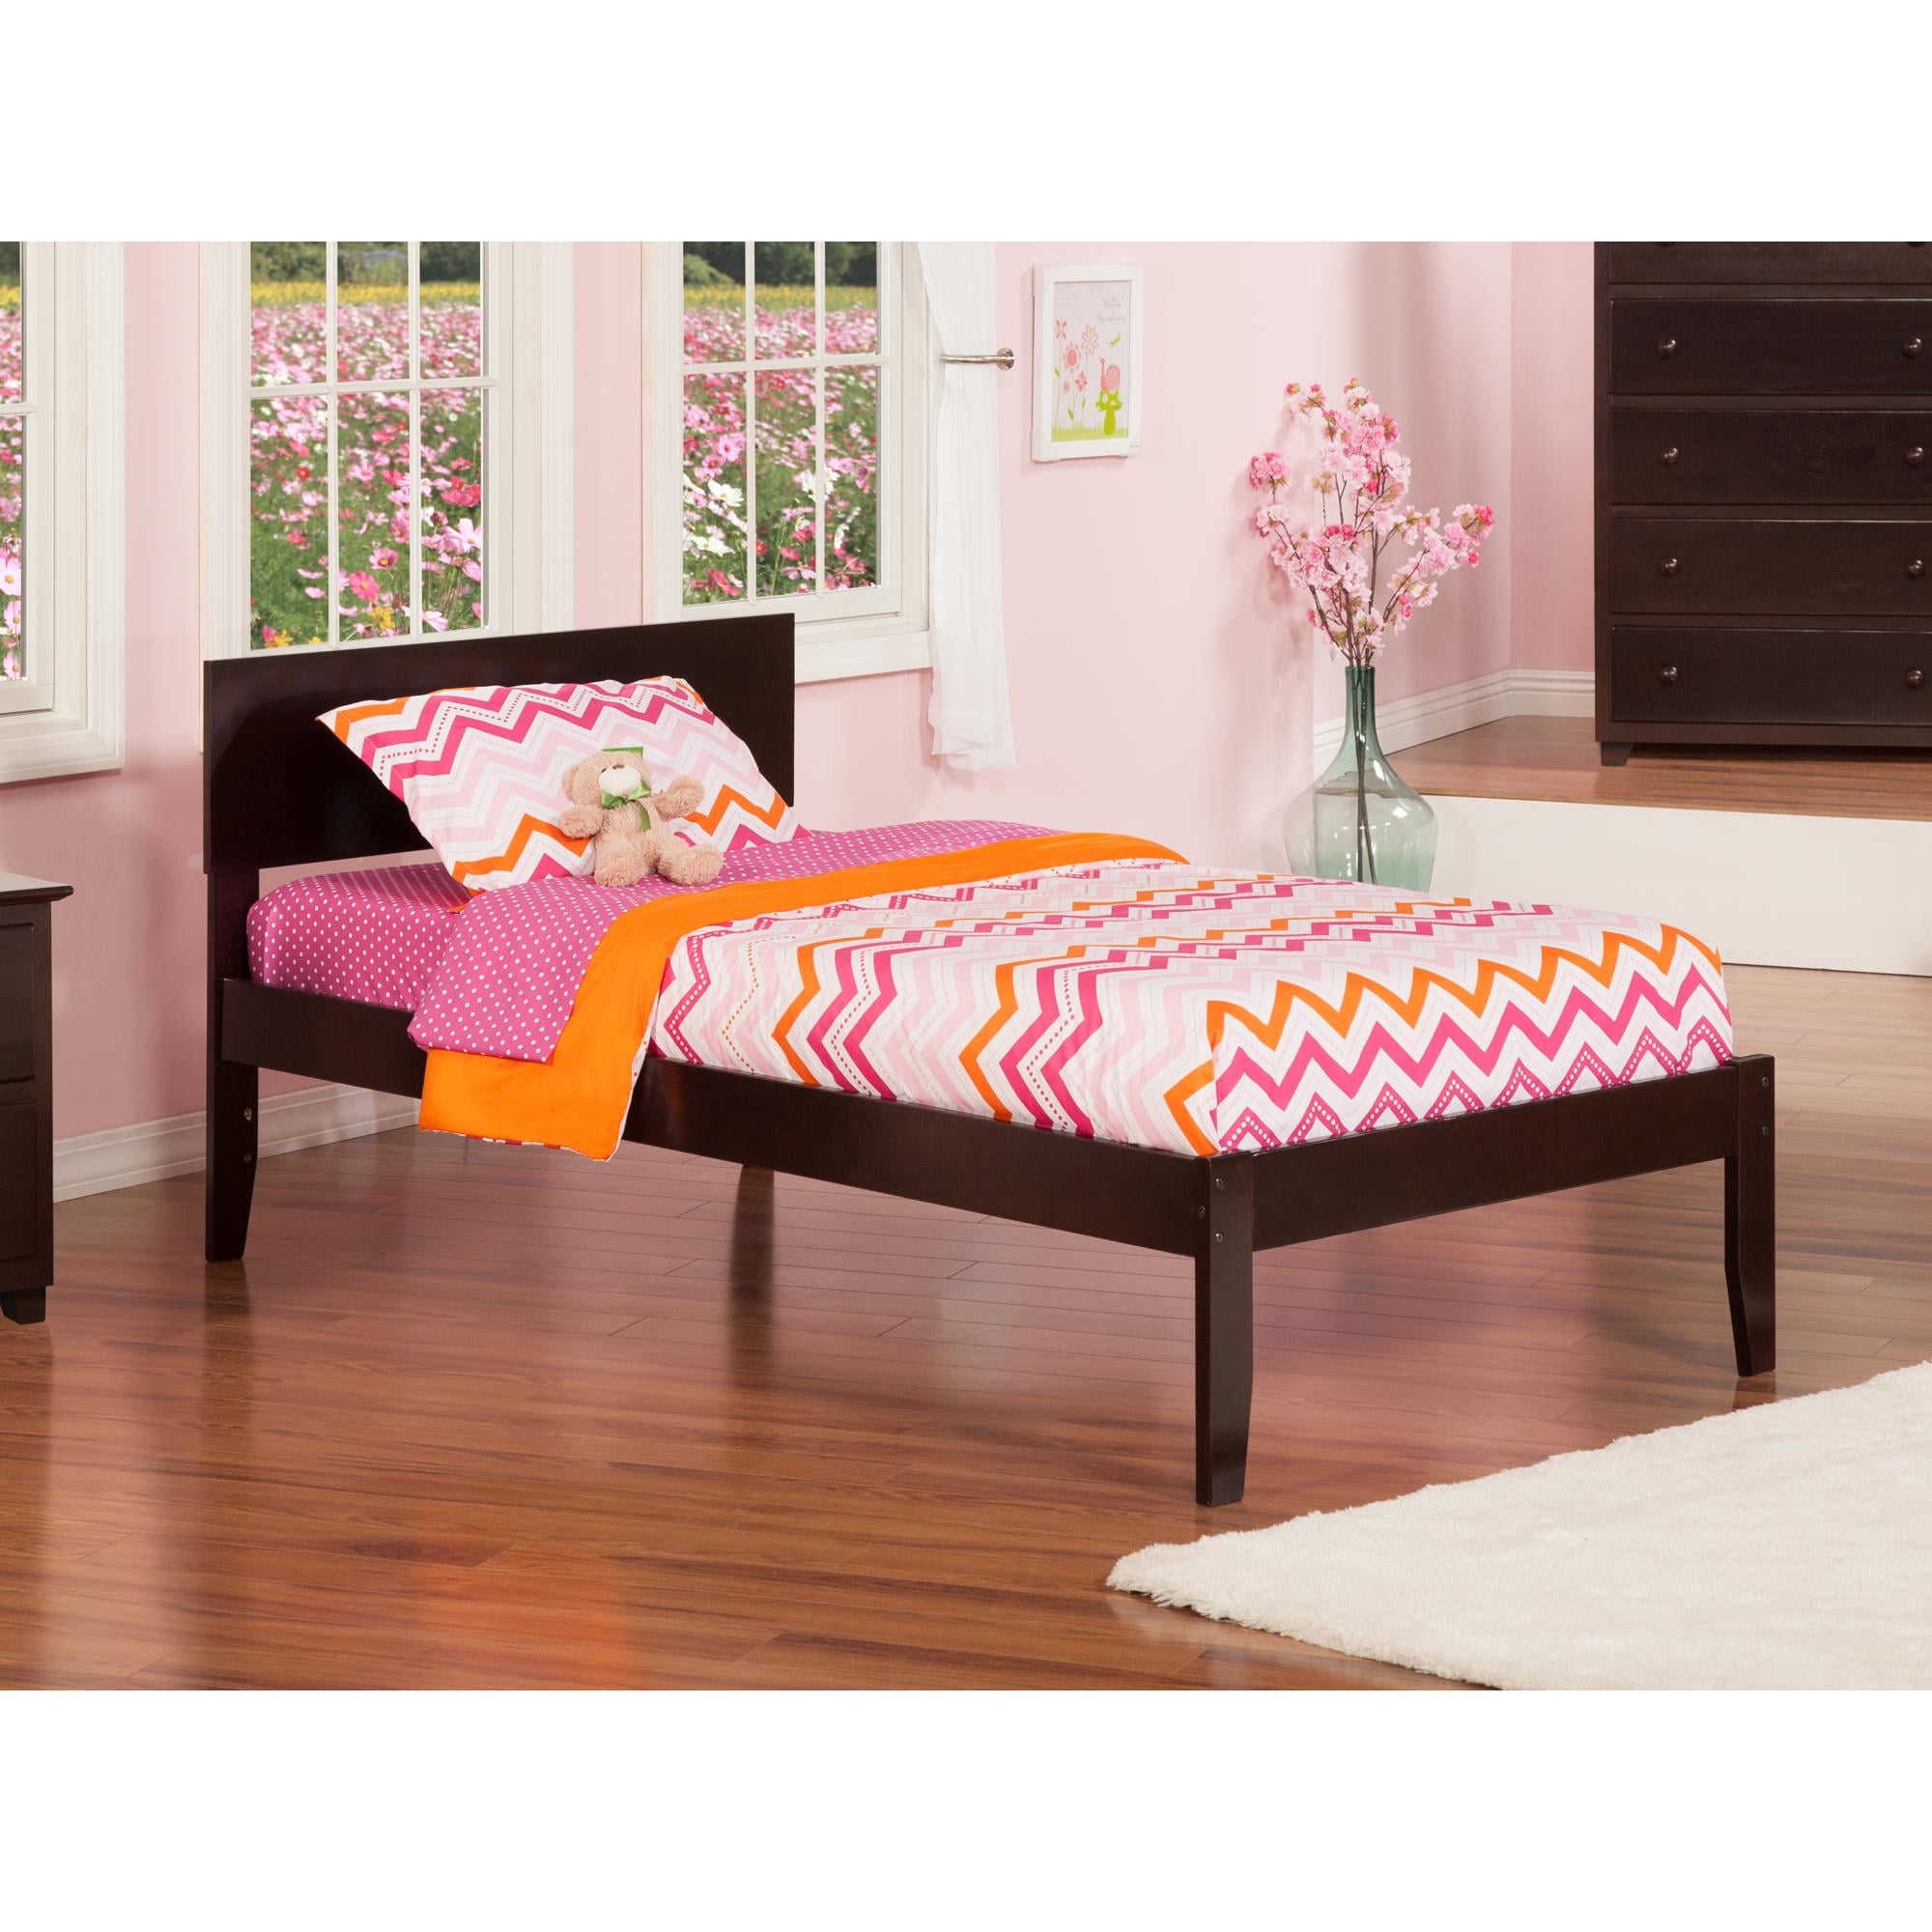 Orlando Twin Xl Platform Bed With Open, Extra Long Twin Bed Frame